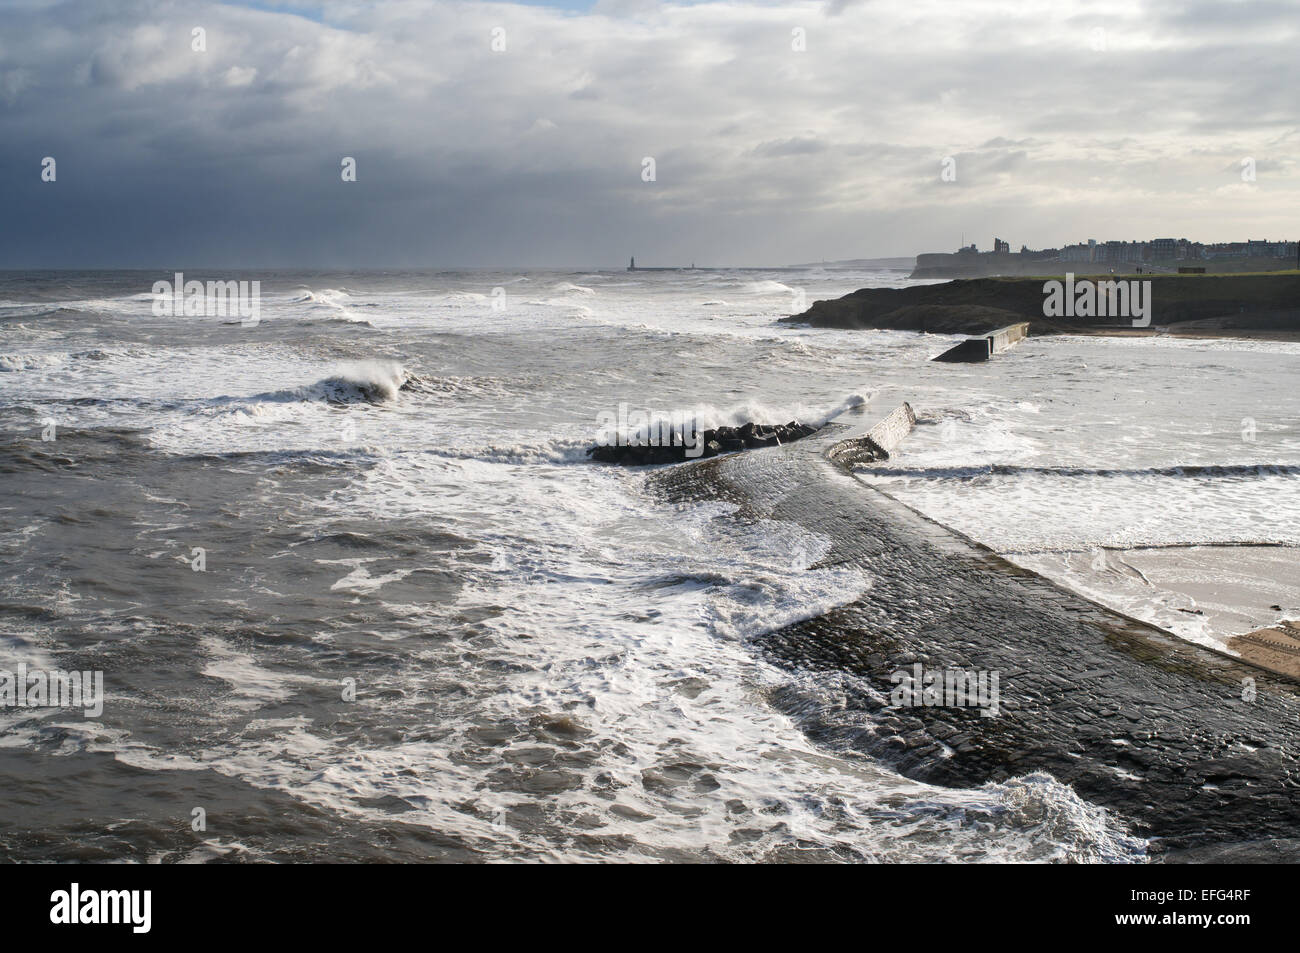 Waves washing over breakwater during stormy conditions, Cullercoats Bay with Tynemouth in background north east England, UK Stock Photo